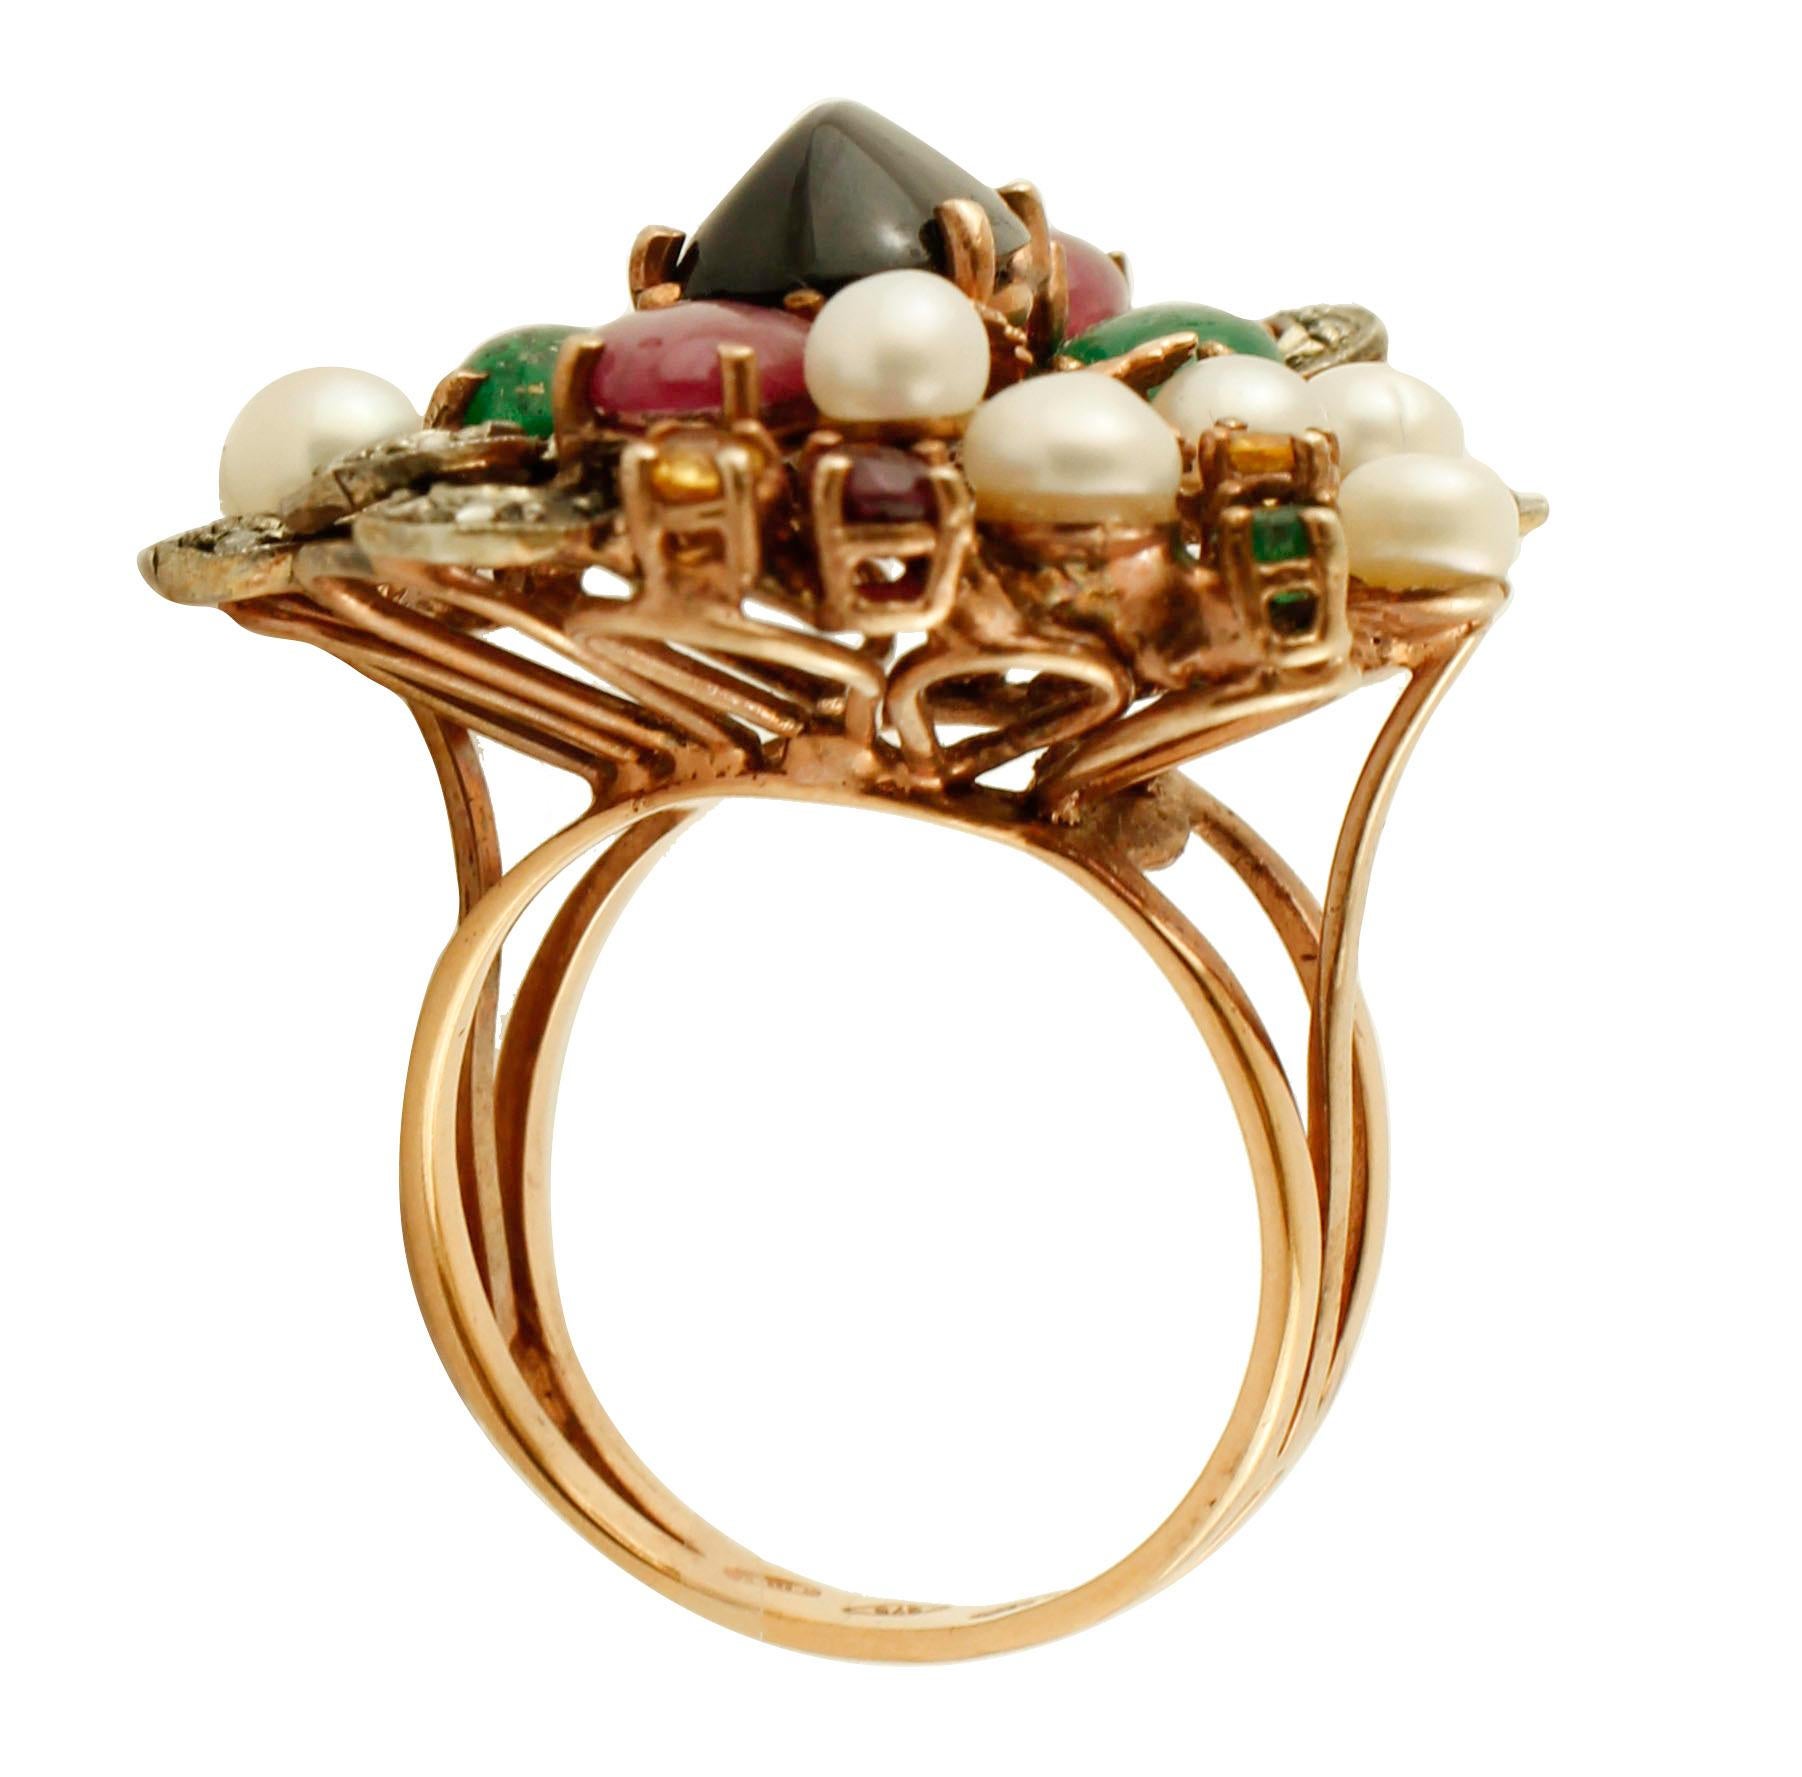 Rose Cut Diamonds, Emeralds, Rubies, Sapphires, Pearls, 9 Karat Rose Gold and Silver Ring For Sale